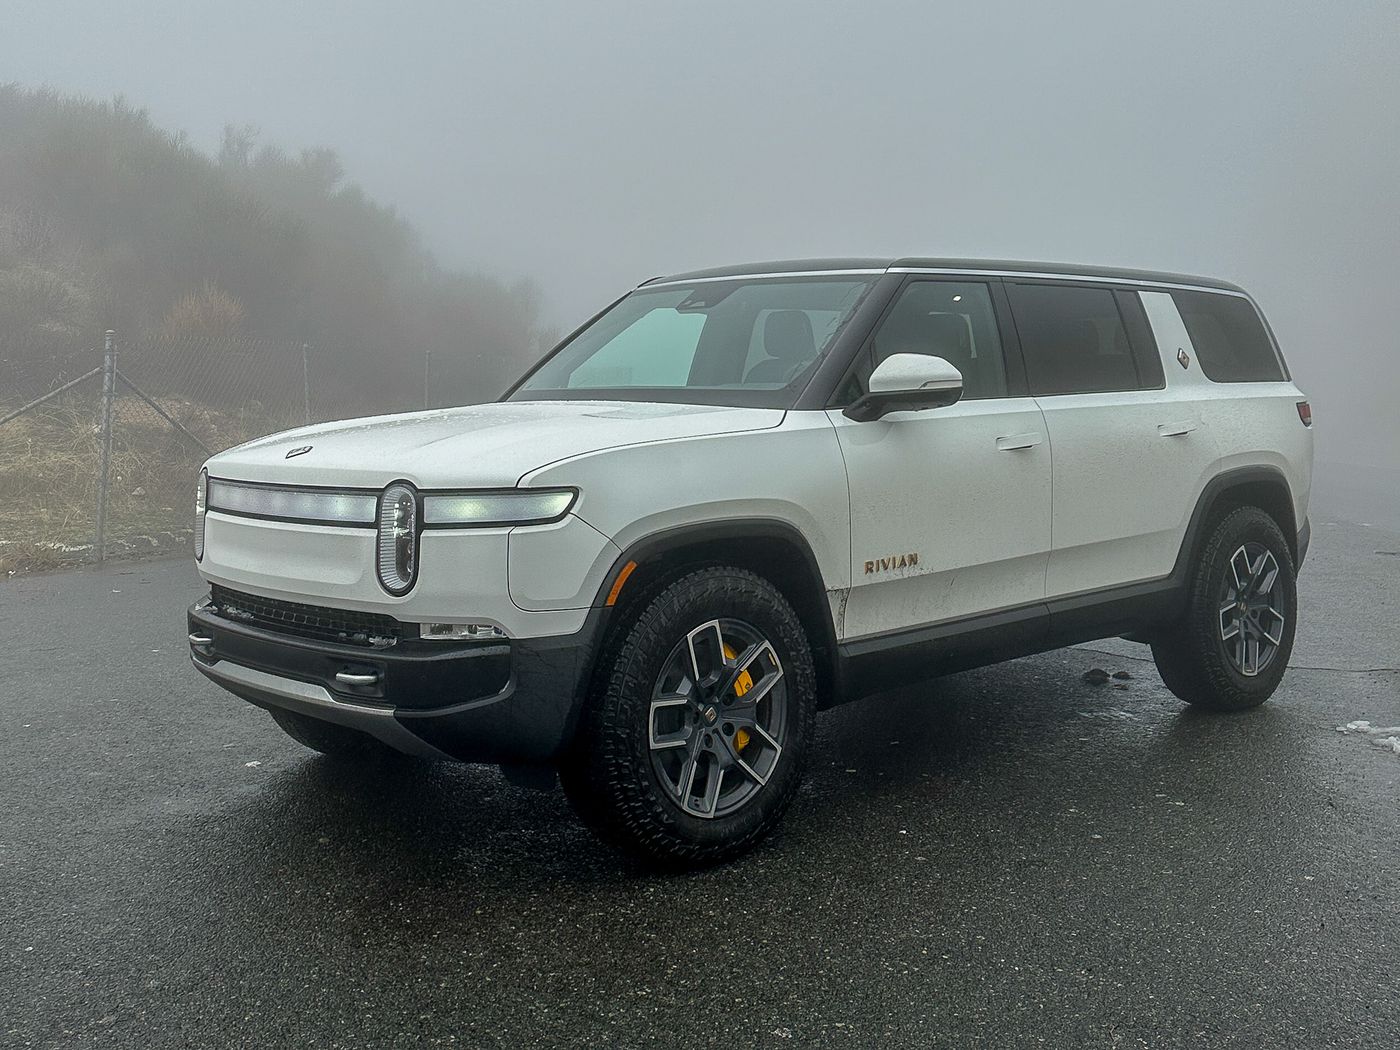 Rivian Reveals R2 Electric Vehicle at $45,000